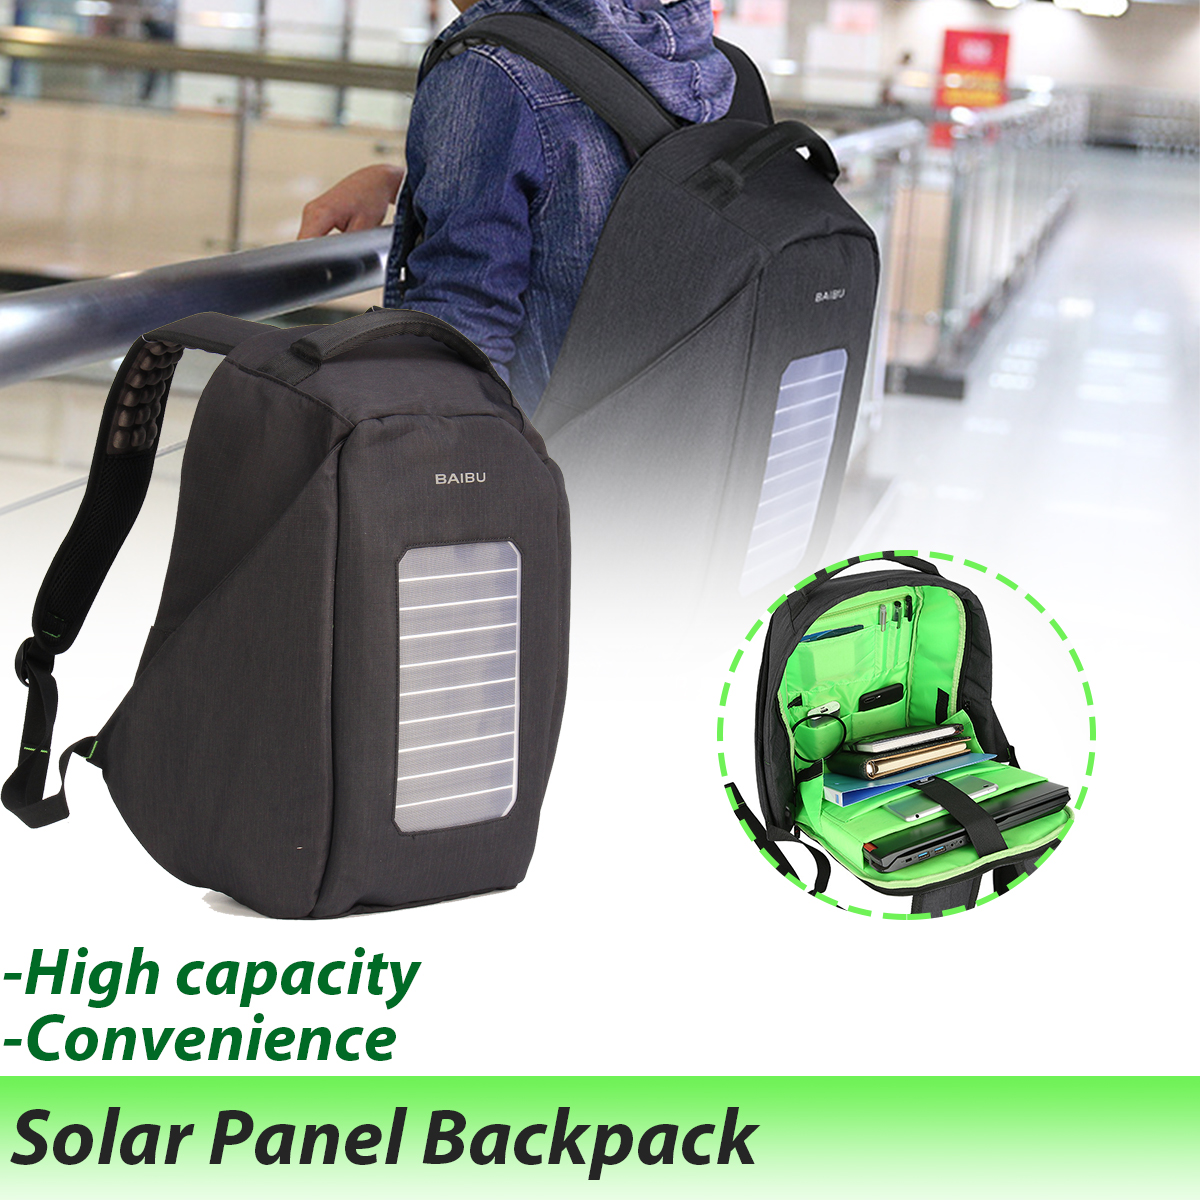 16-inch-Waterproof-Solar-Panel-Backpack-Laptop-USB-Charger-Outdoor-Travel-Camping-Bags-1244084-1